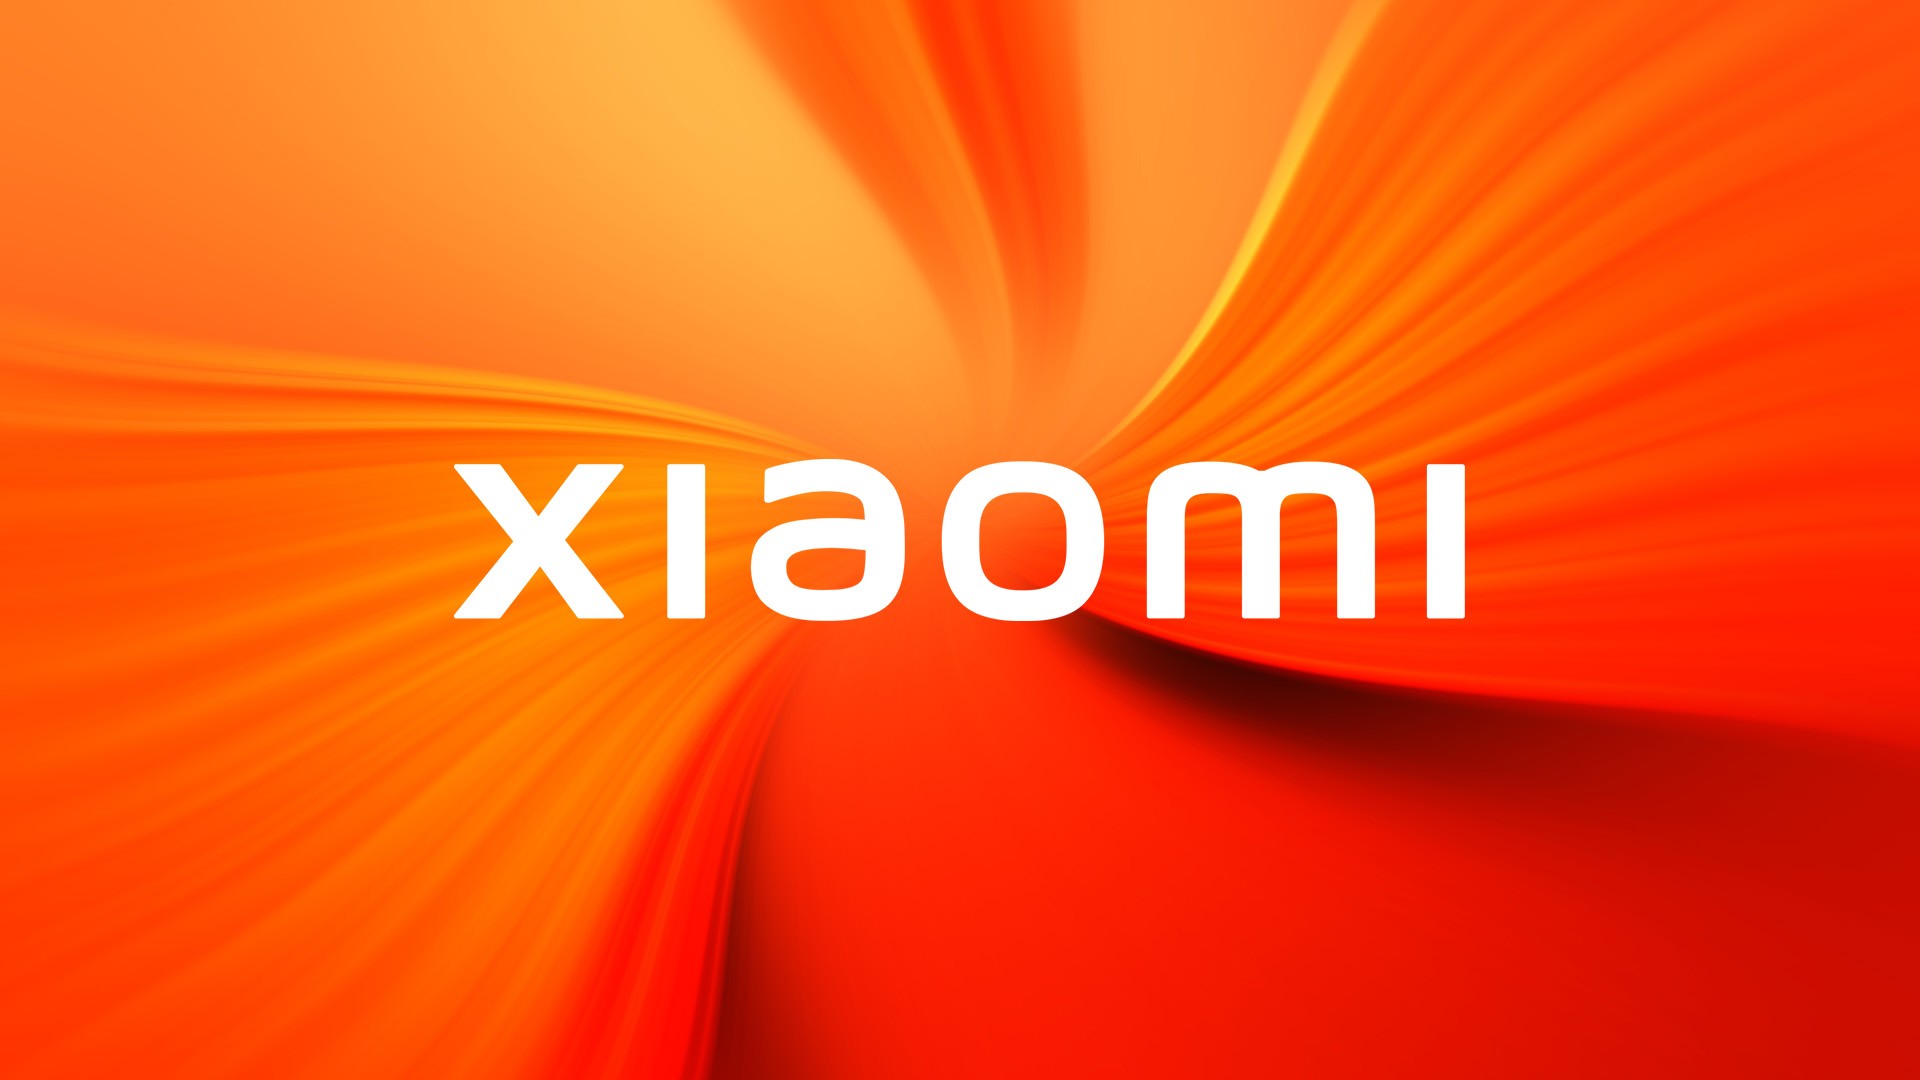 Xiaomi may announce mass layoffs and rumor scares employees
